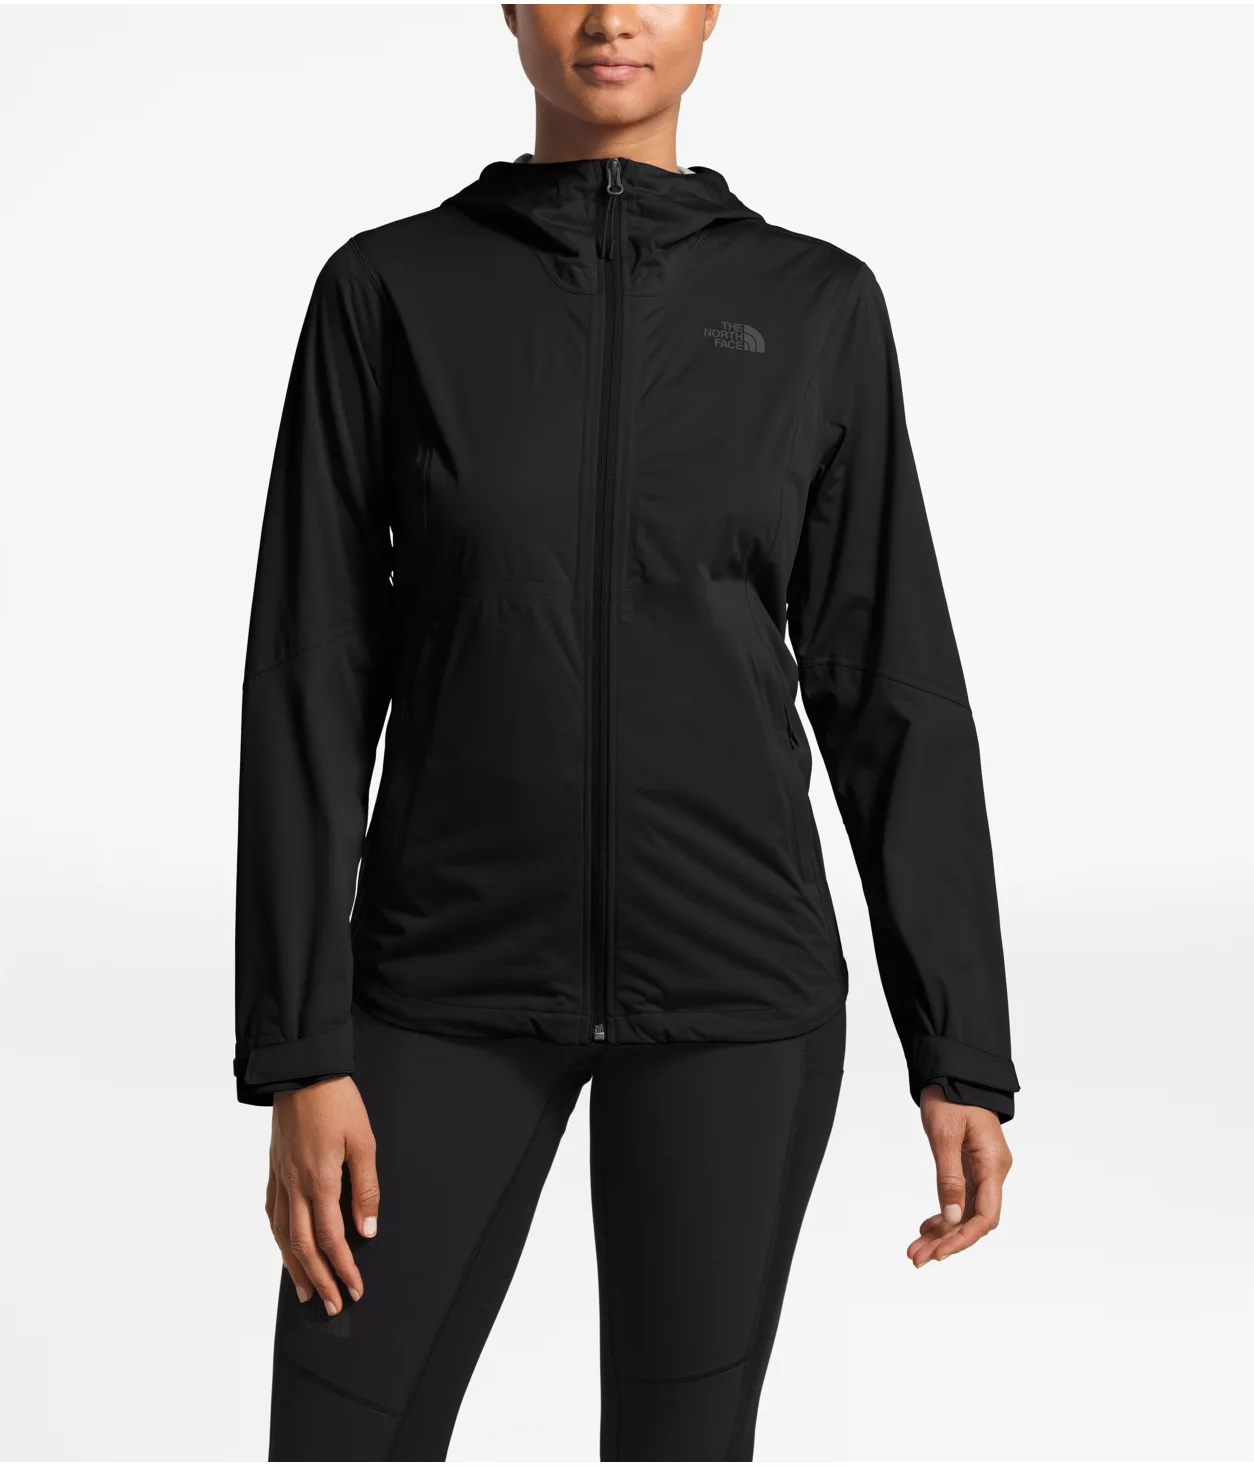 Women's Allproof Stretch Jacket